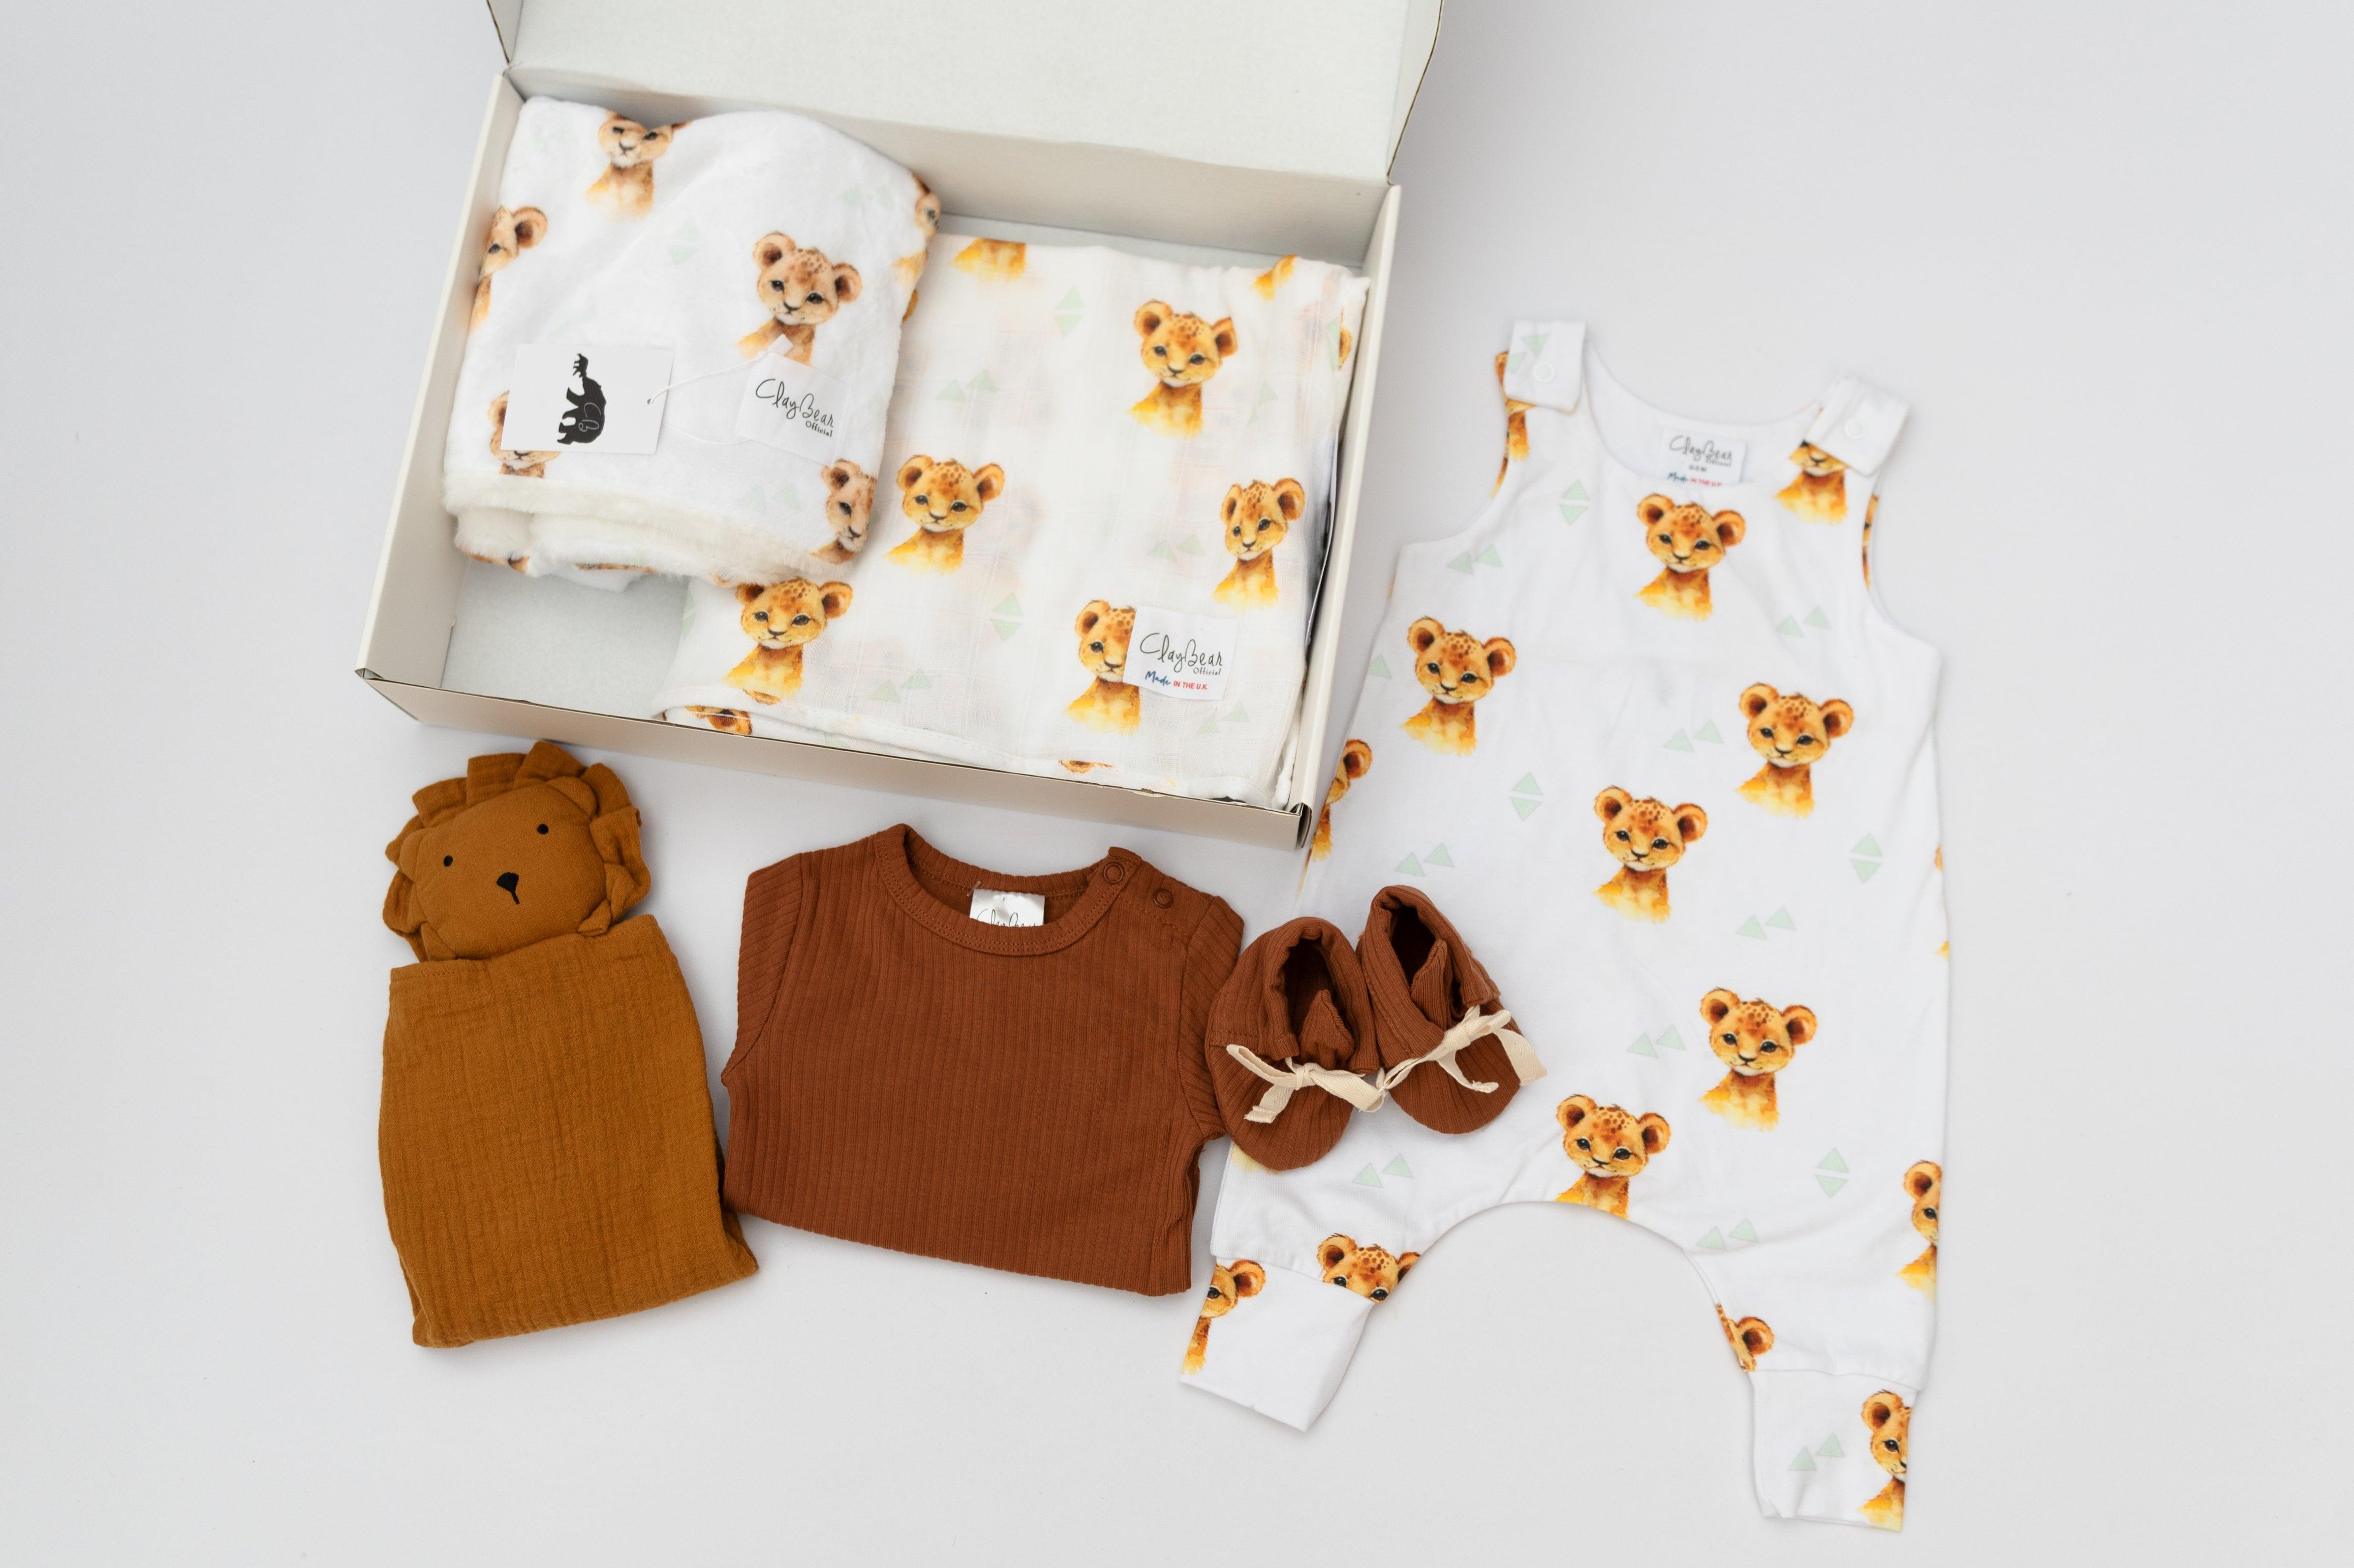 files/new-baby-gift-box-lion-cub-claybearofficial-12.jpg